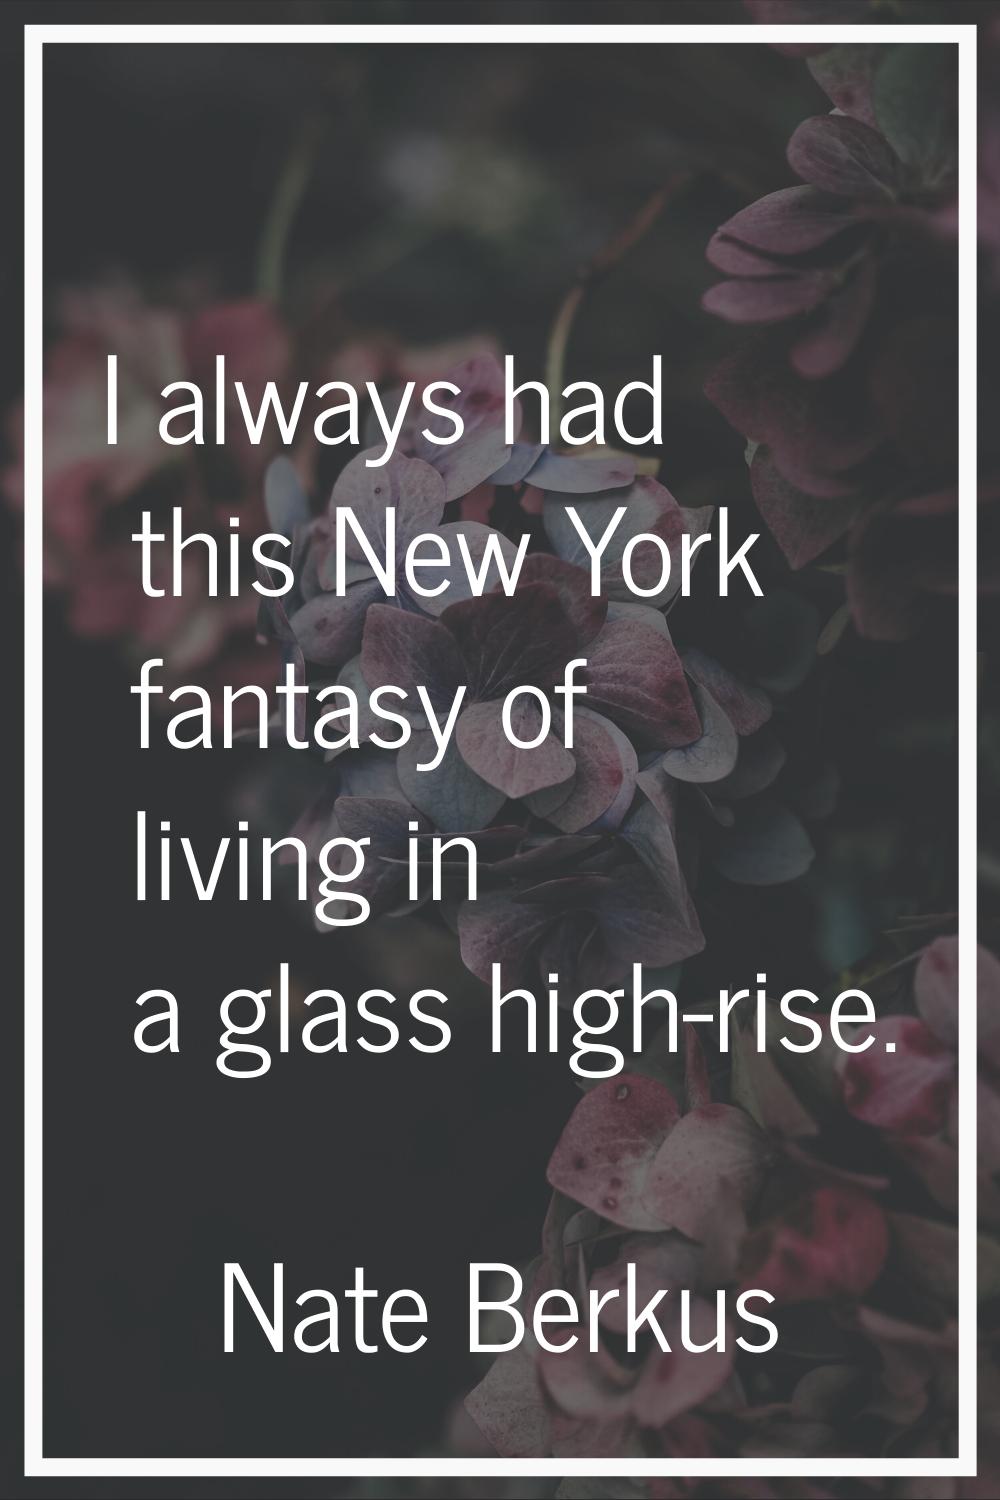 I always had this New York fantasy of living in a glass high-rise.